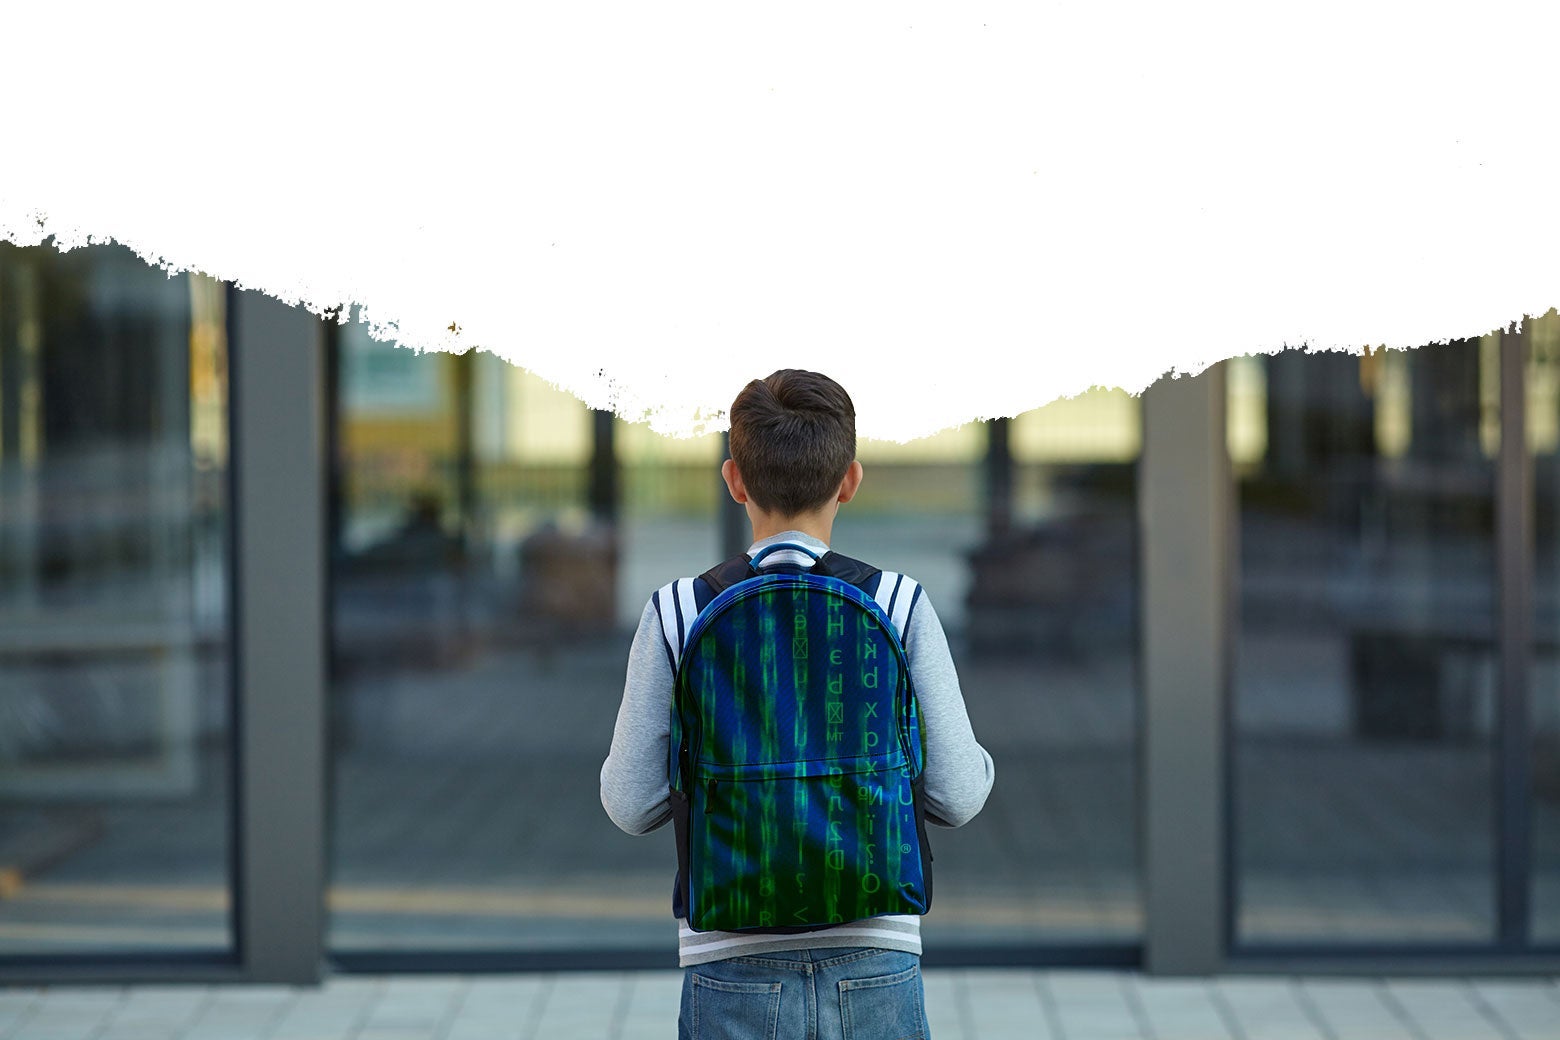 A kid walking into school wearing a backpack, with the top of the image erased.